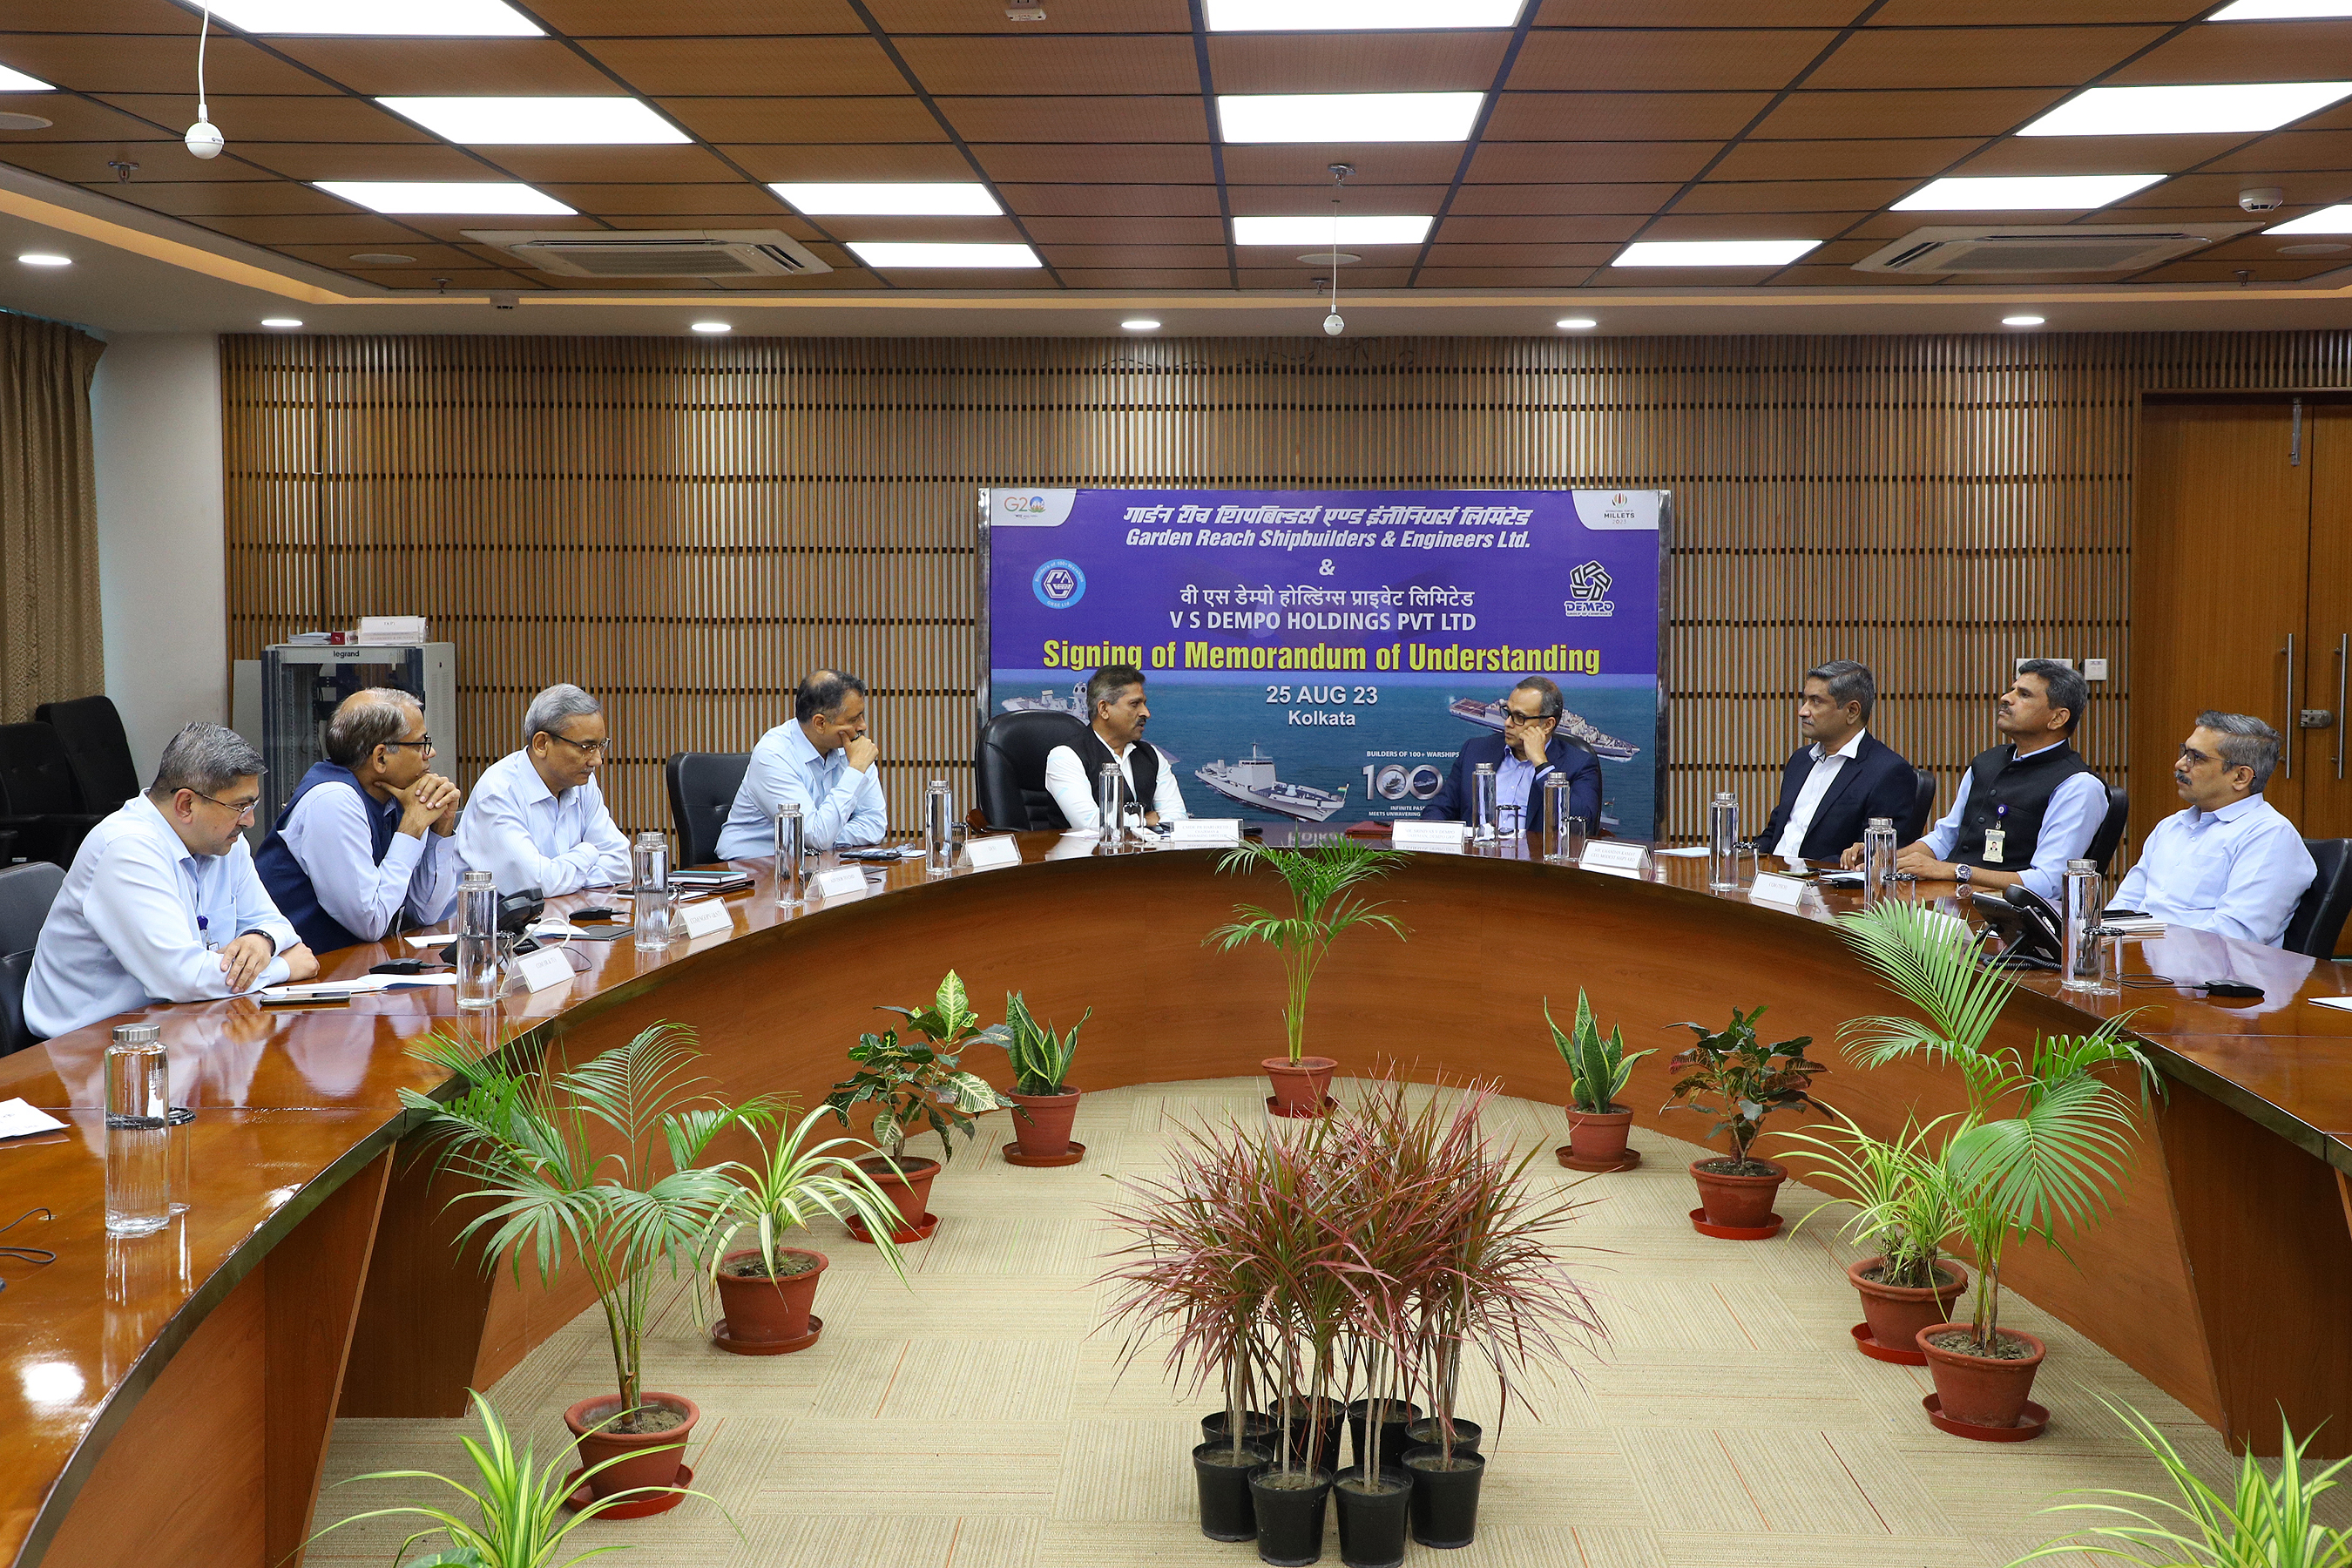 GRSE joins hand with DEMPO, GOA to build commercial vessels on the West Coast on 25 Aug 23